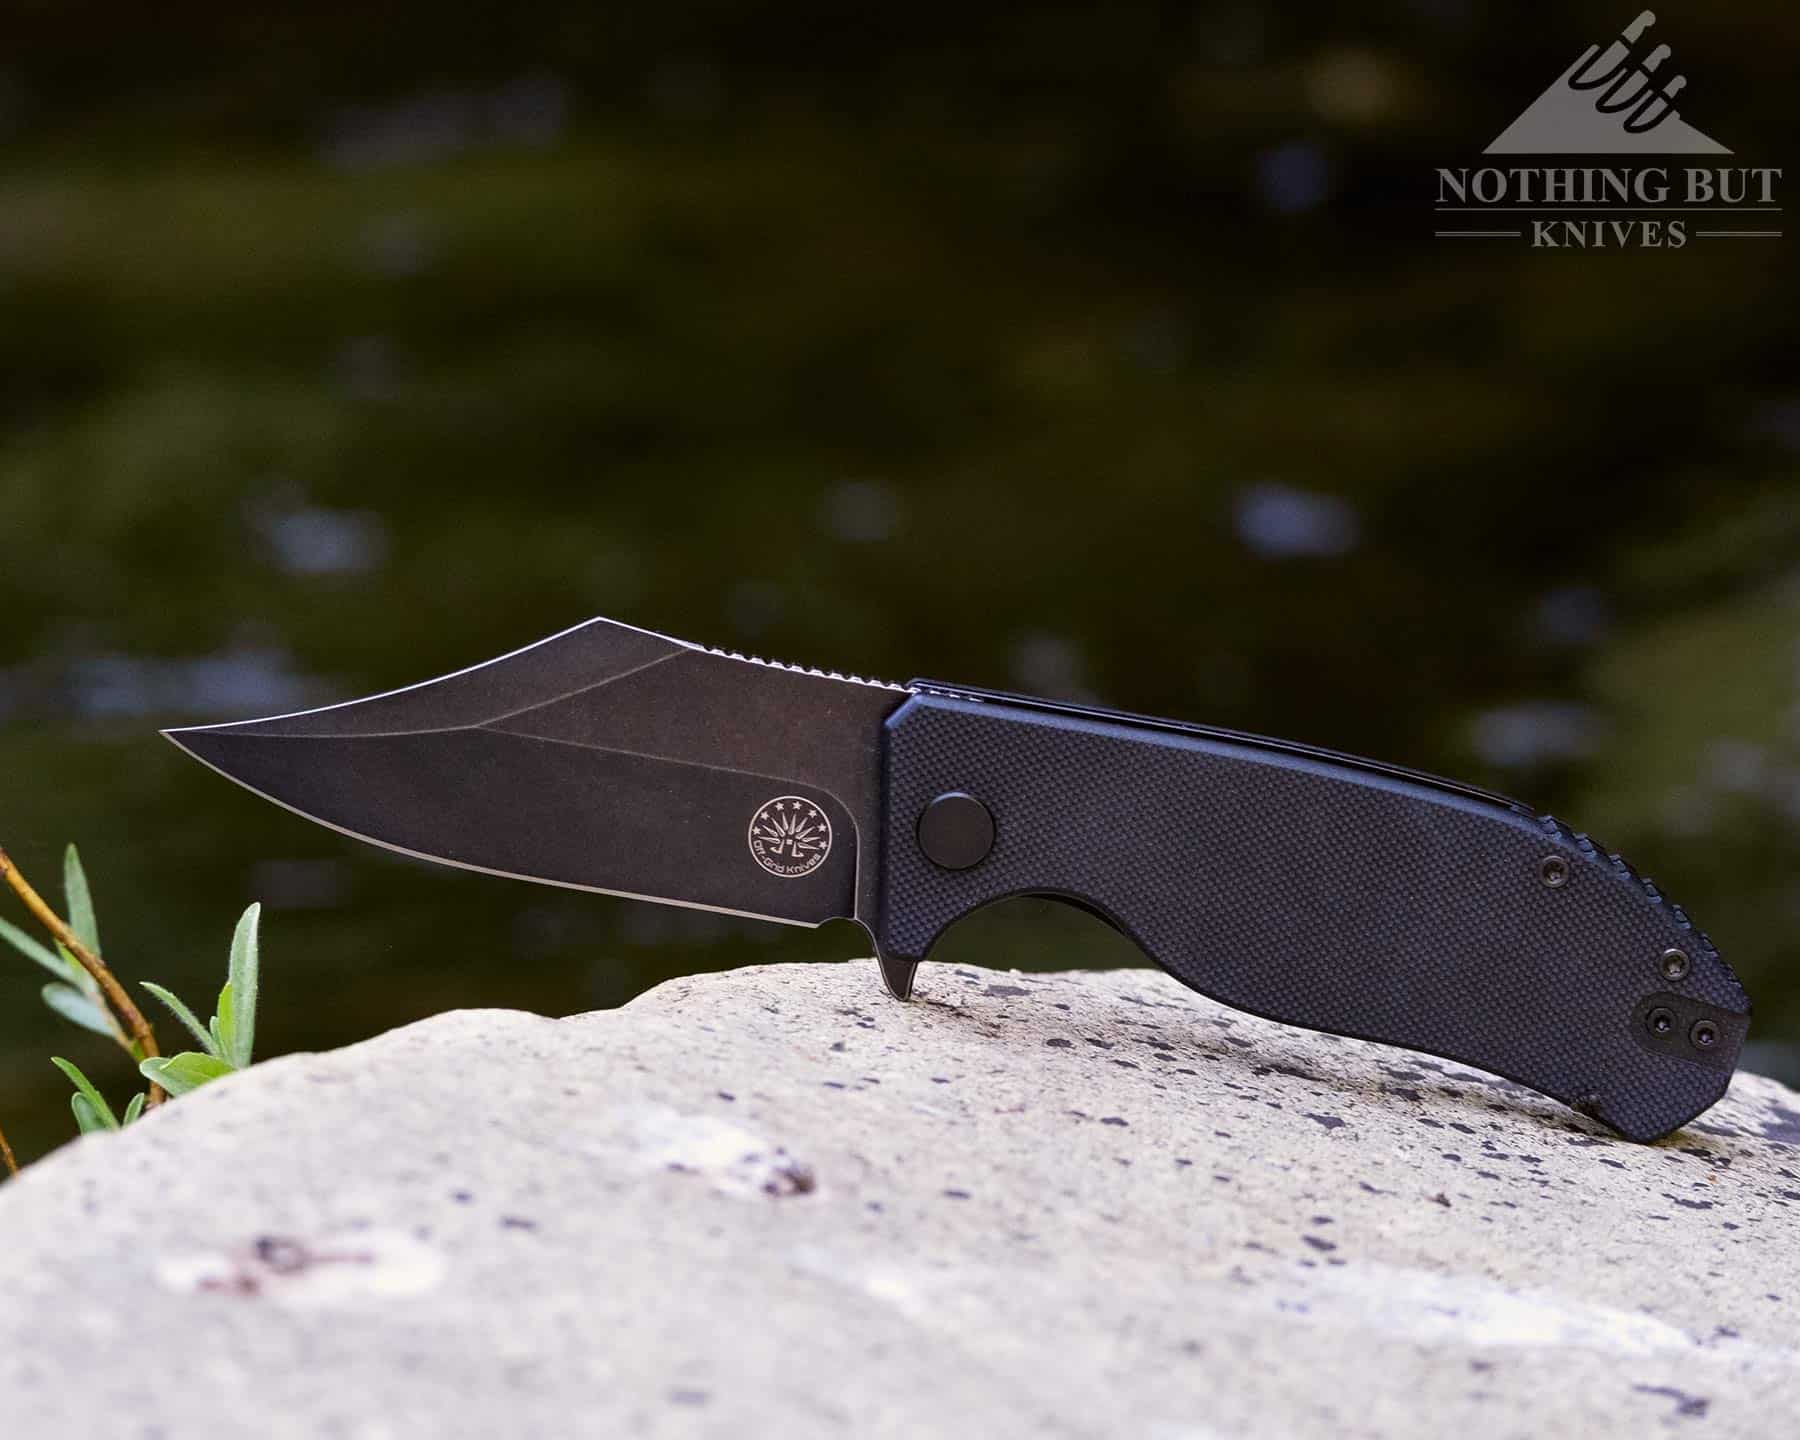 We reviewed the Off-Grid Caiman Bowie style folding knife. It is pictured here on a granite rock in a mountain creek.